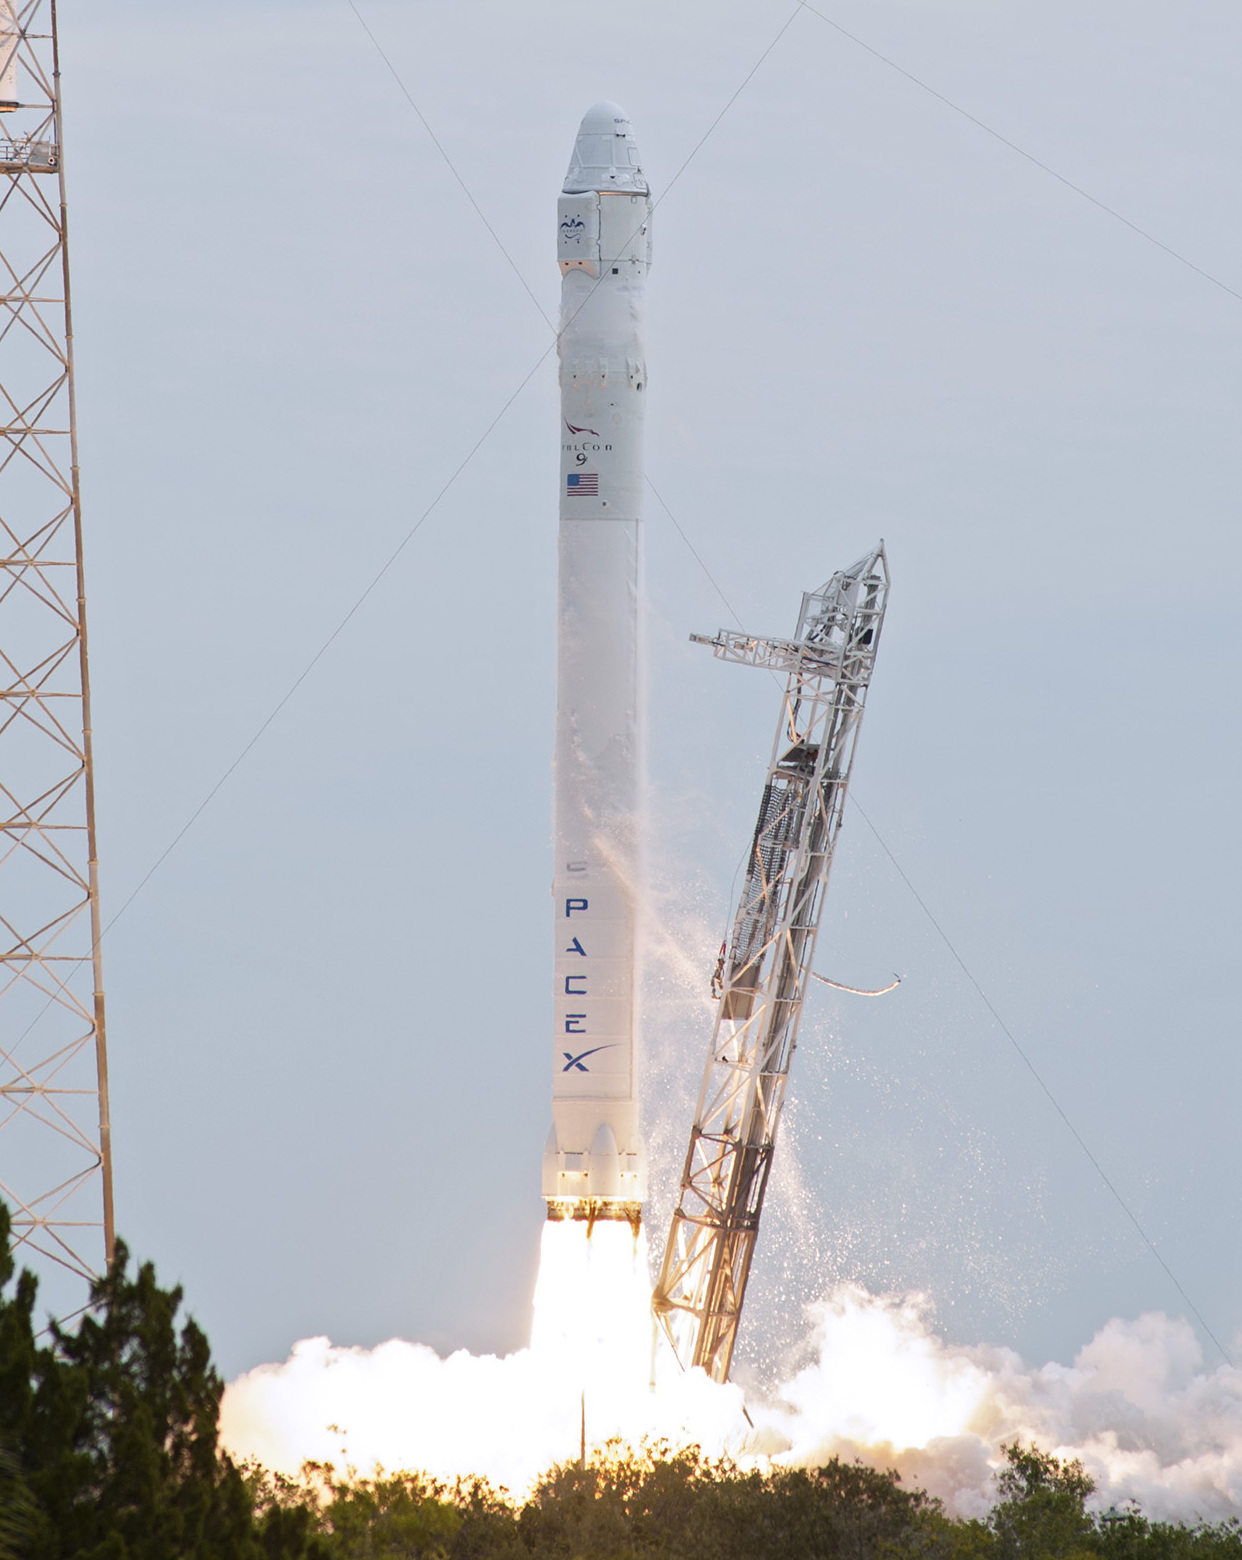 spx_crs-2_launch_further_cropped.jpg